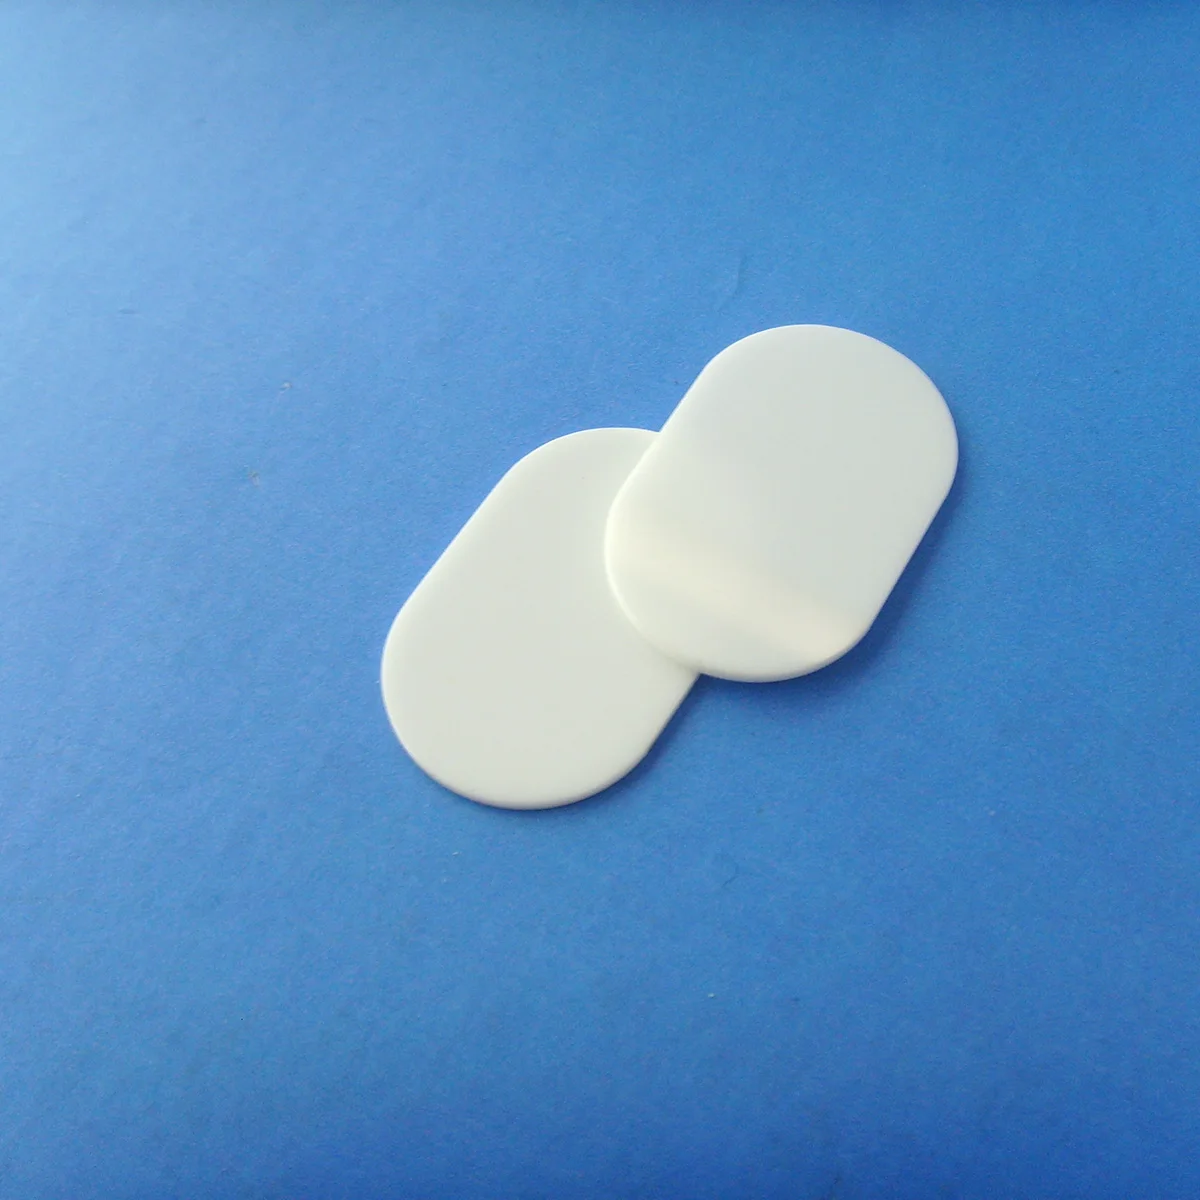 95% 96% Alumina Ceramic Substrate Aln Ceramic Substrate Wafer For Power ...